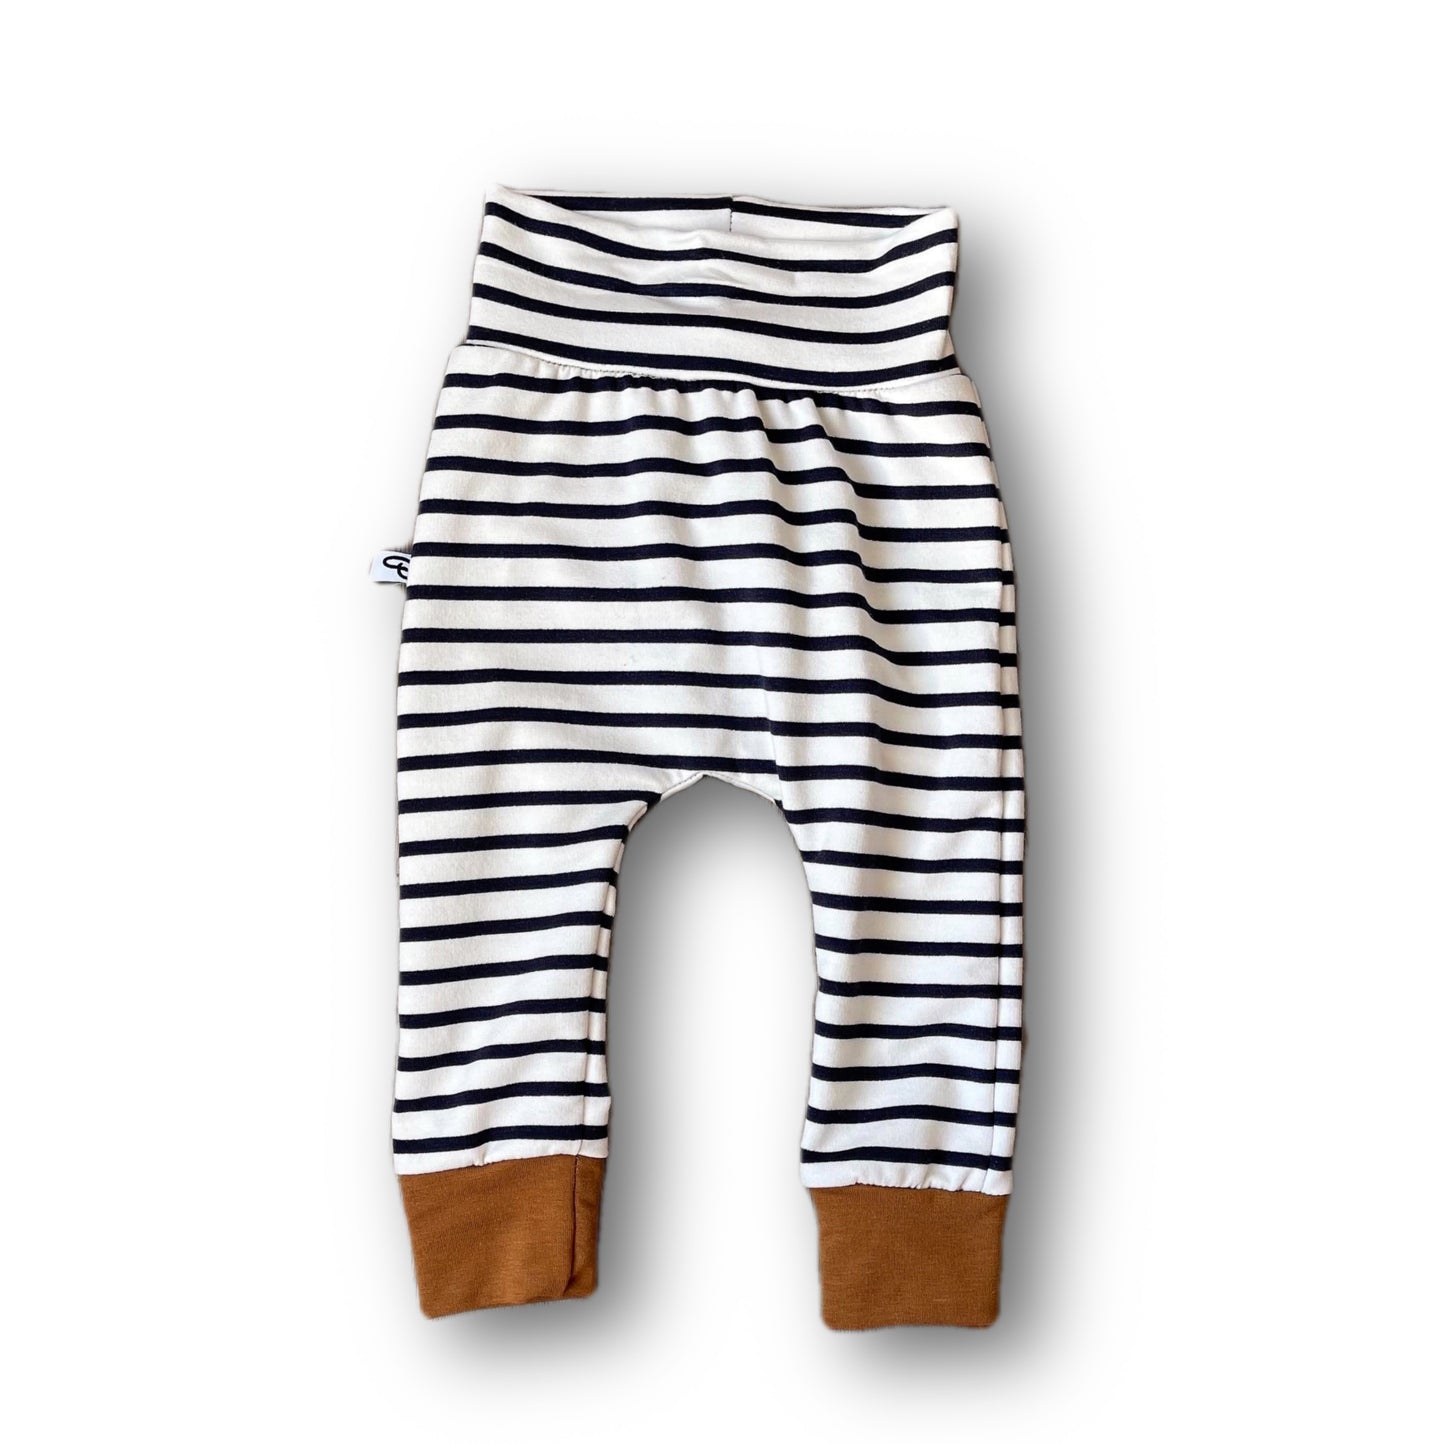 Kids Bamboo Hoodie with Baggy Pants - Navy Striped and Butterscotch